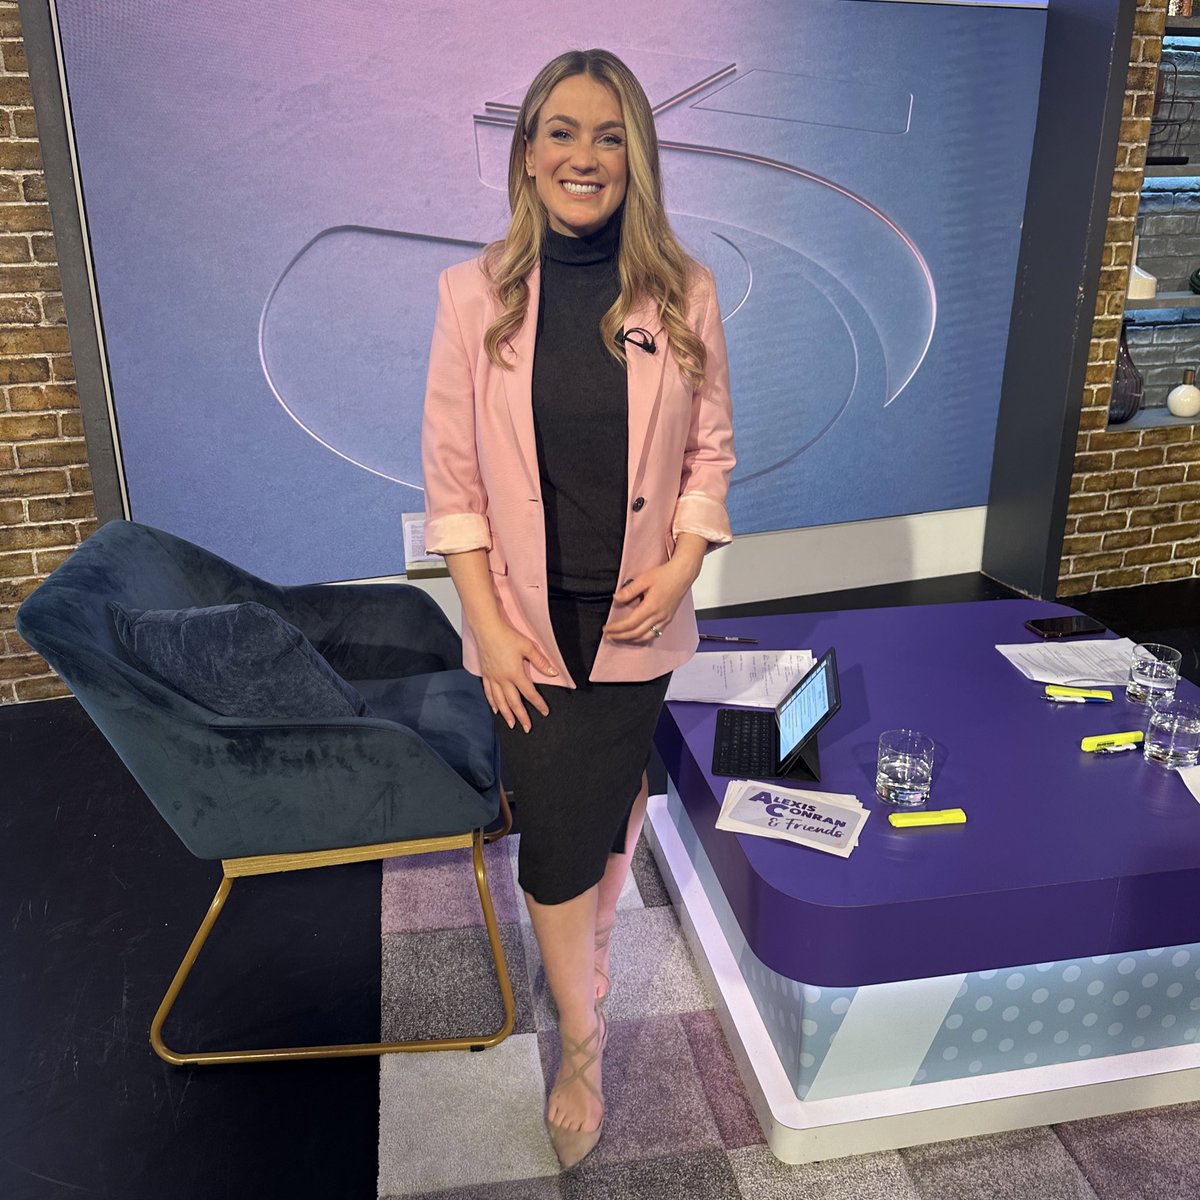 A bit of a pinch myself moment today hosting @JeremyVineOn5. I do quite a lot of live TV, but never actually been the main gal on a show. I love it all! Talkback, autocue, callers, guests, working with an amazing production team. Thank you so much for having me 🙏